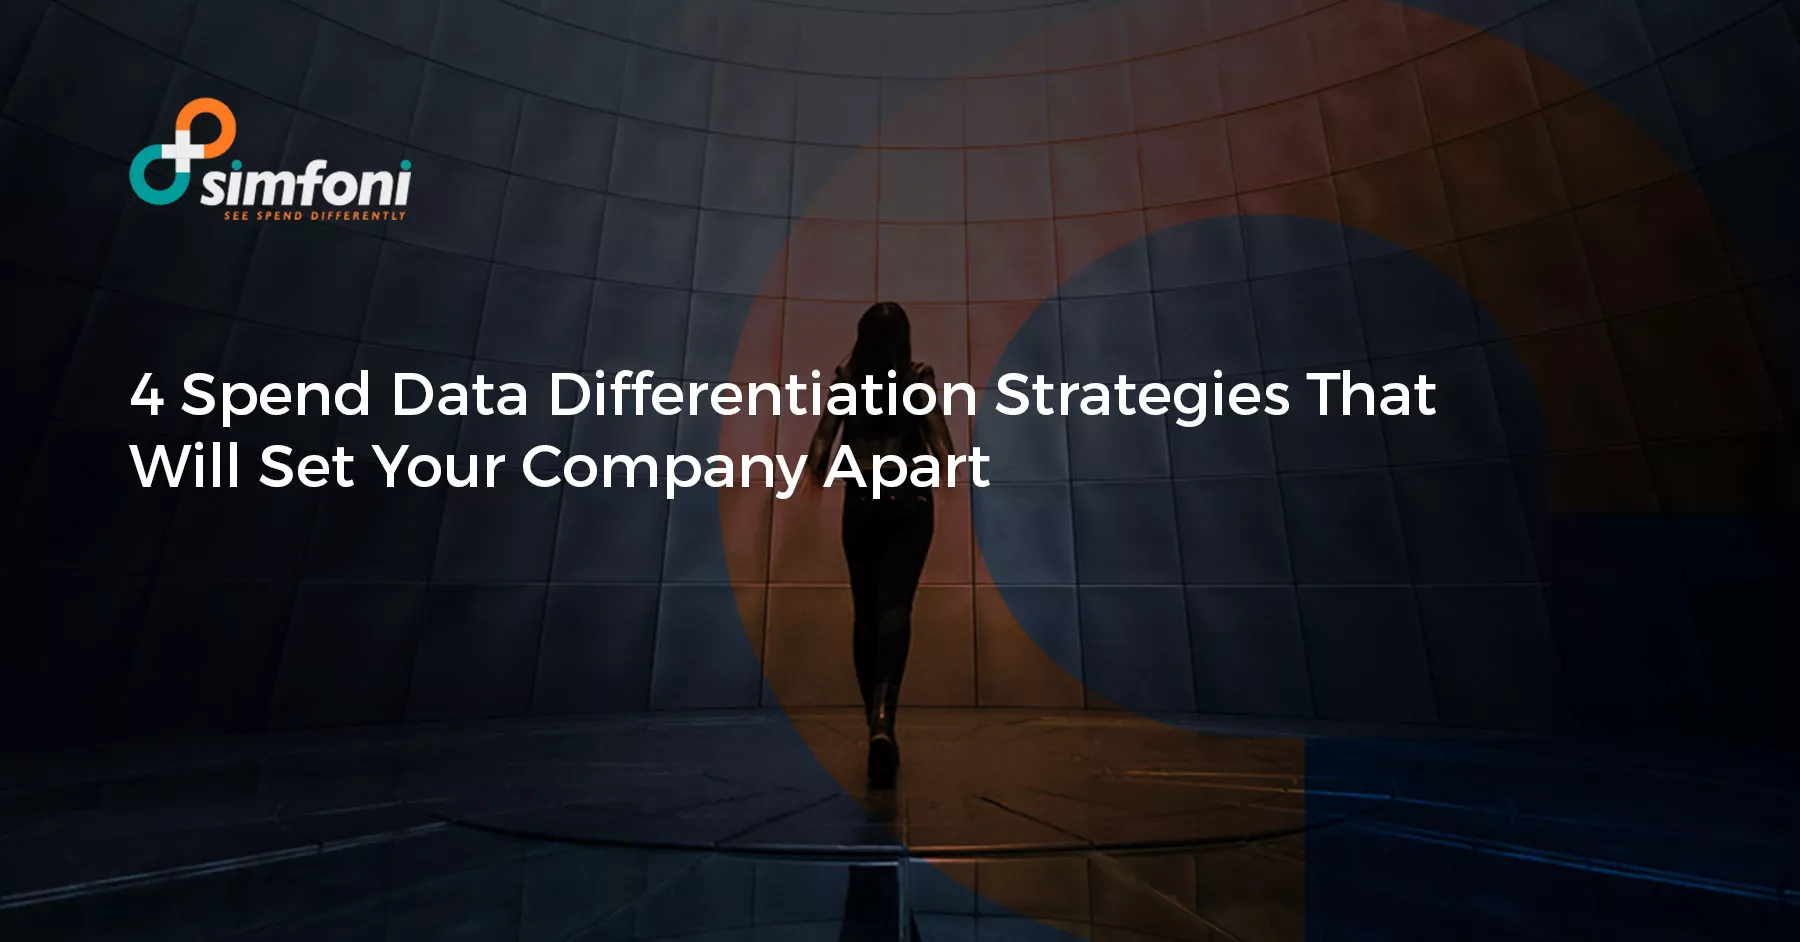 4 Spend Data Differentiation Strategies That Will Set Your Company Apart